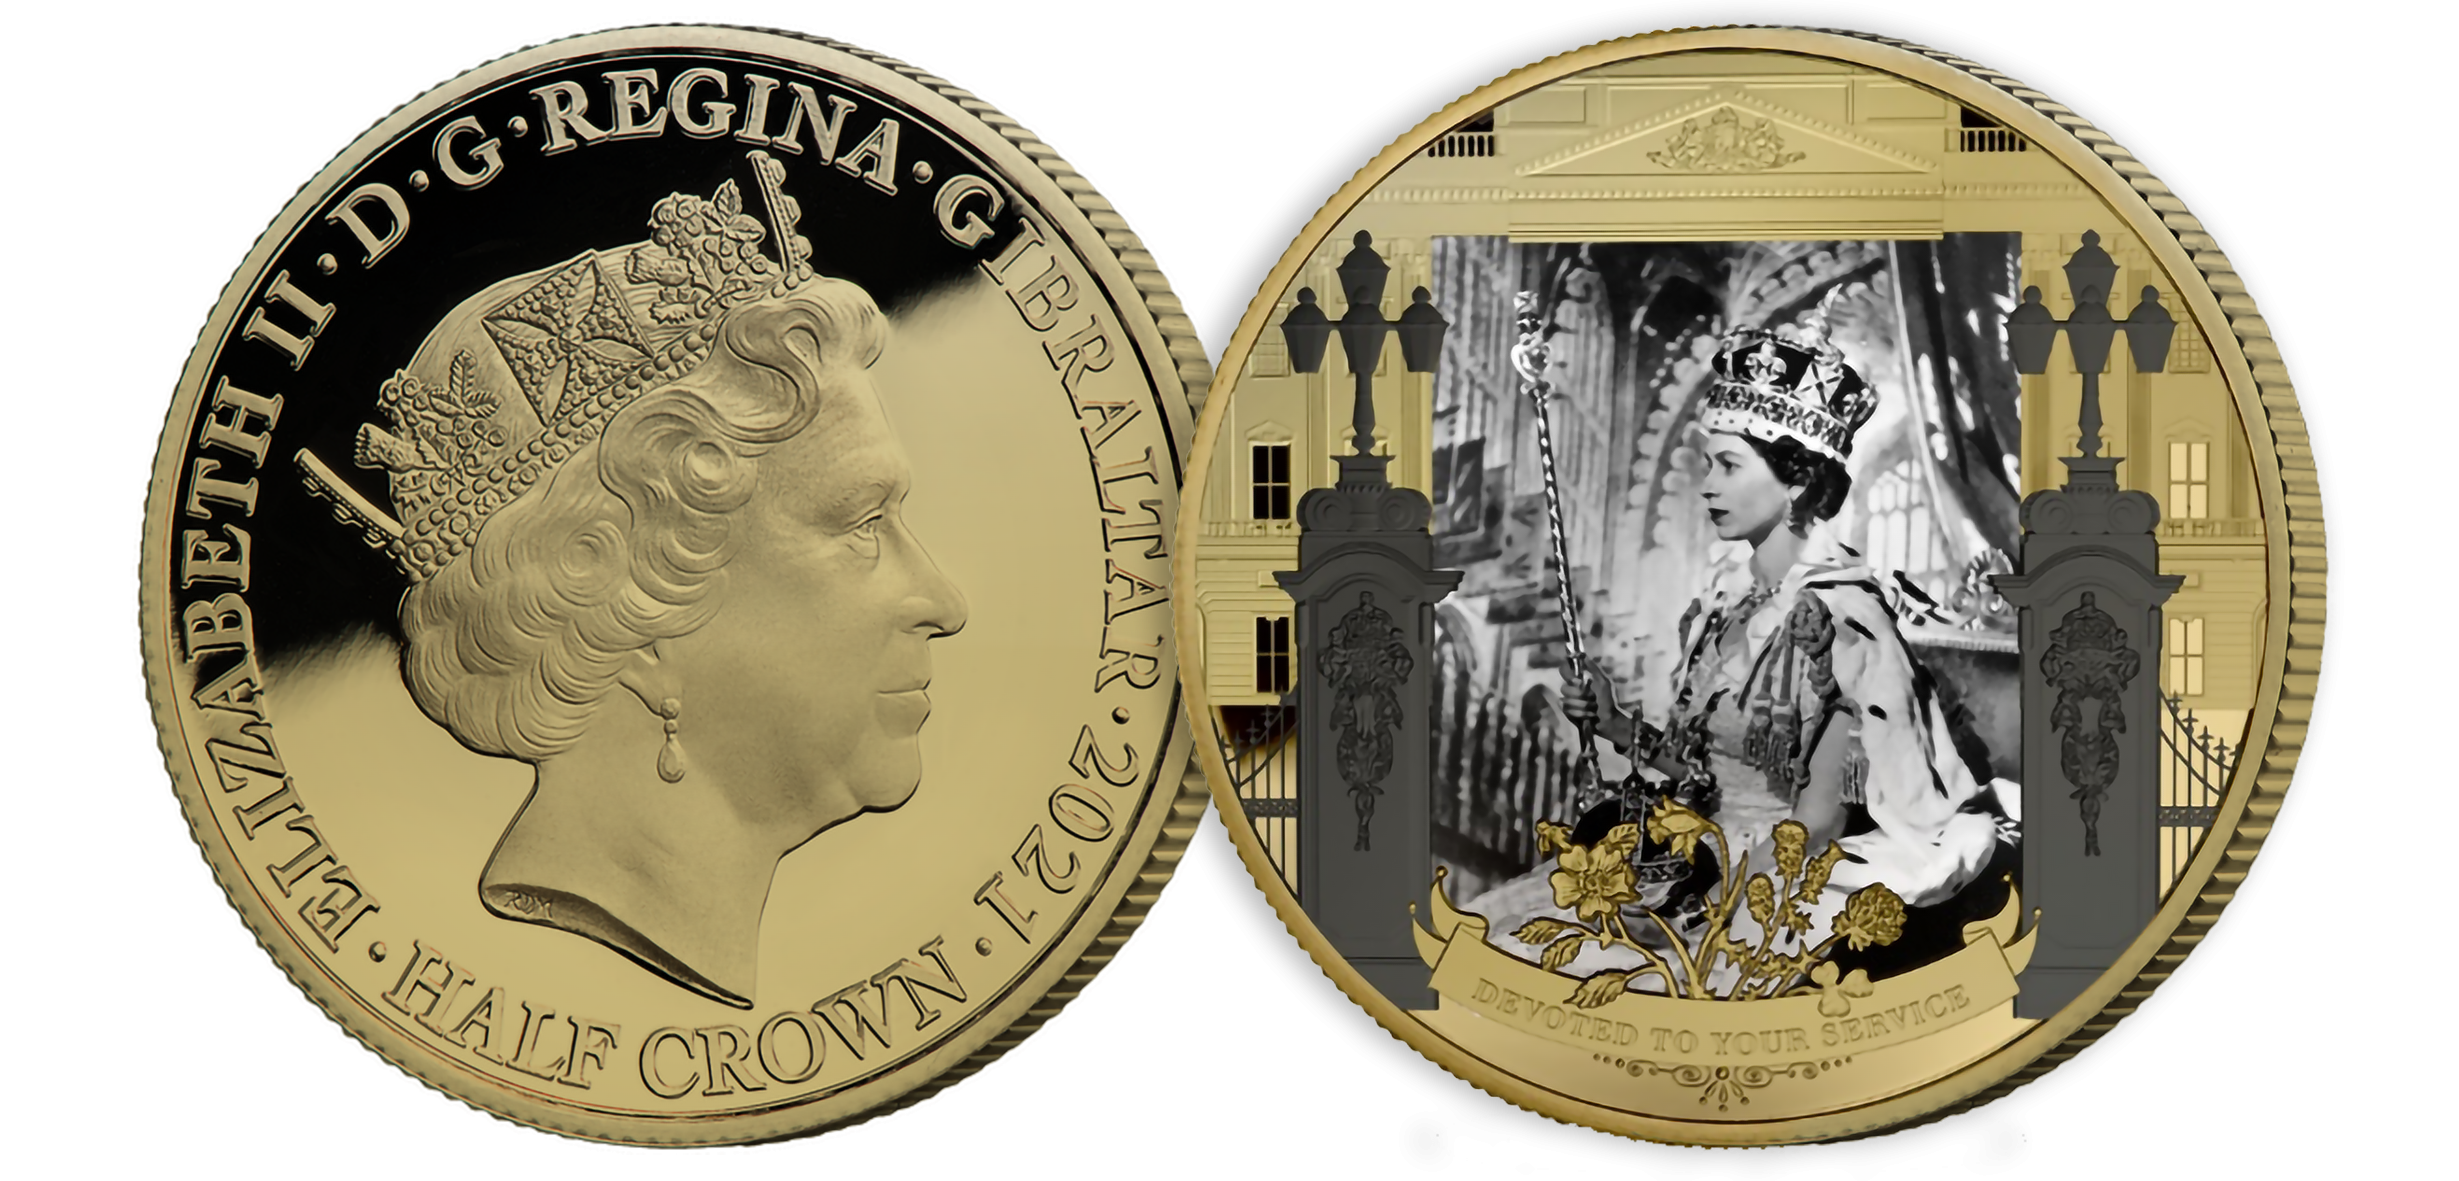   The photograph featured on the coin was taken on June 2nd, 1953, marking the formal  beginning of what would become the longest reign in British history. Coin layered in fairmined  gold.